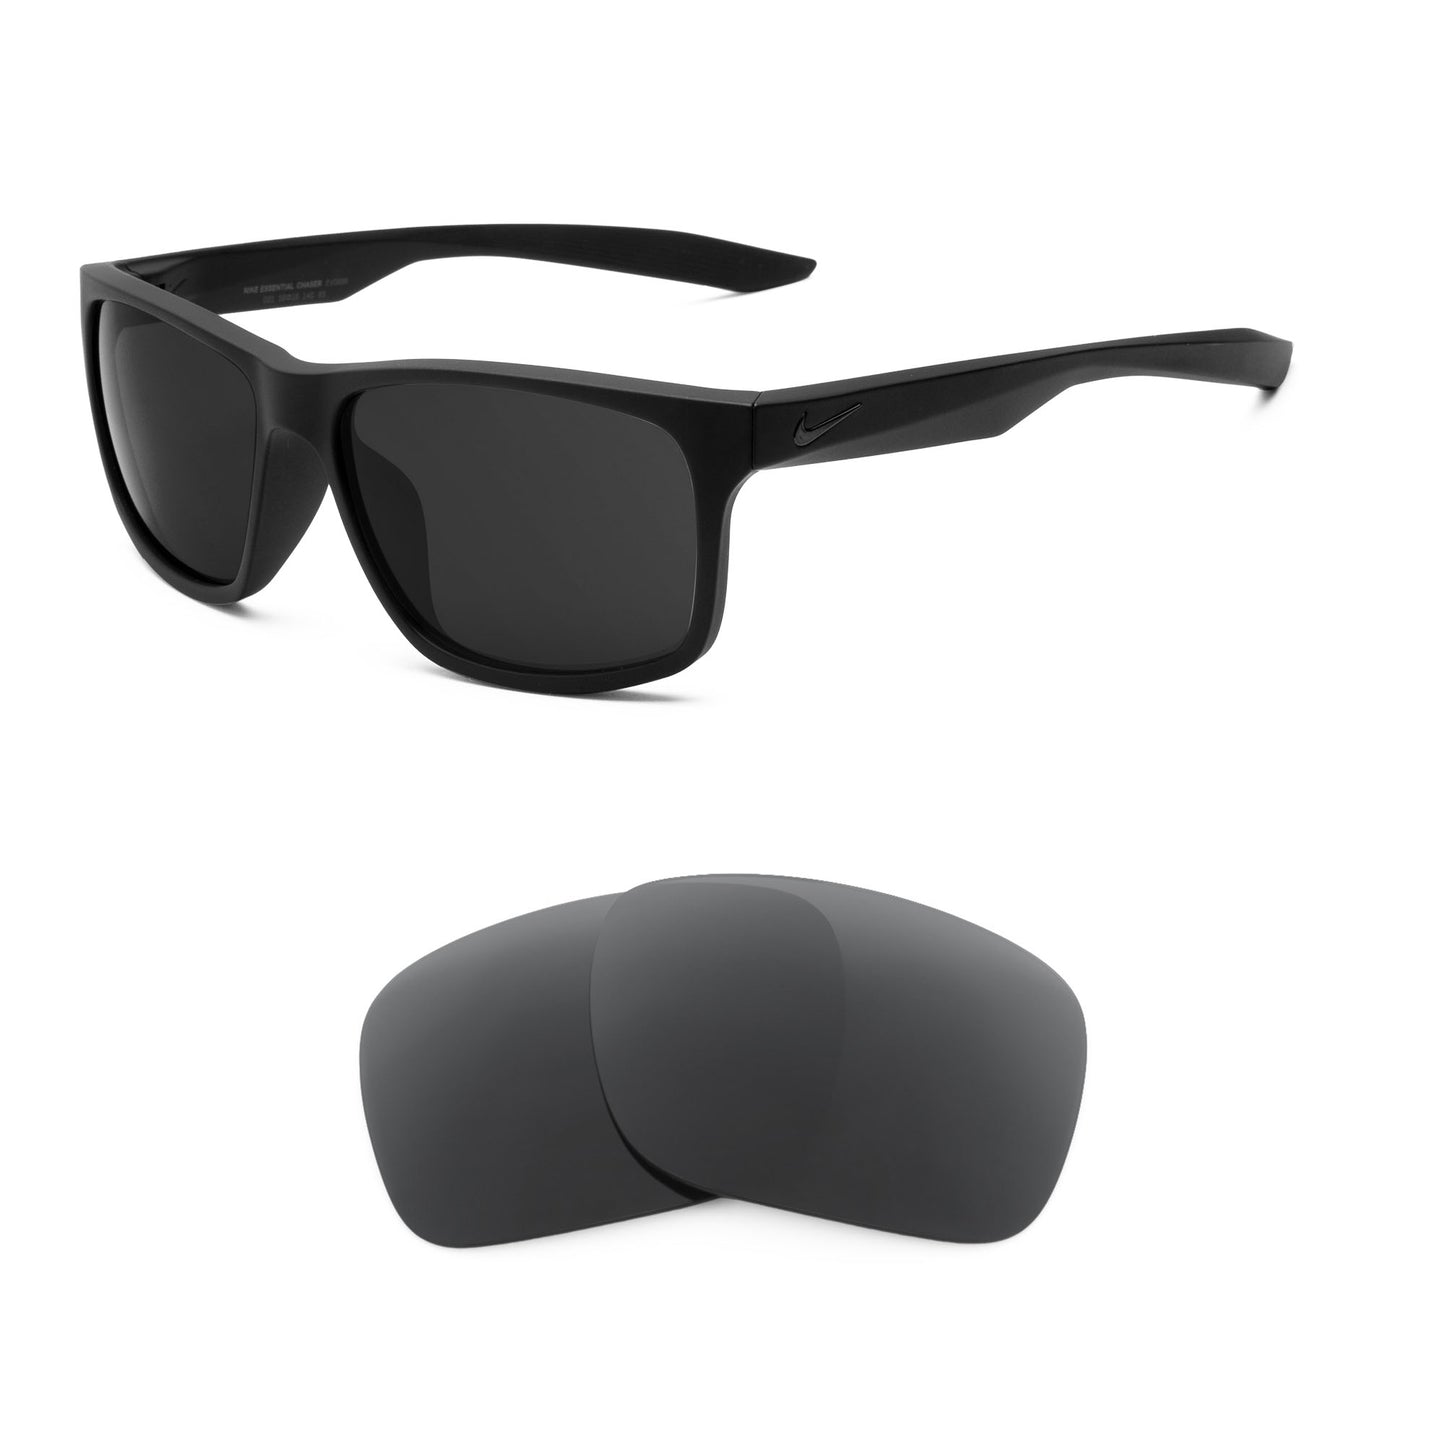 Nike Chaser sunglasses with replacement lenses